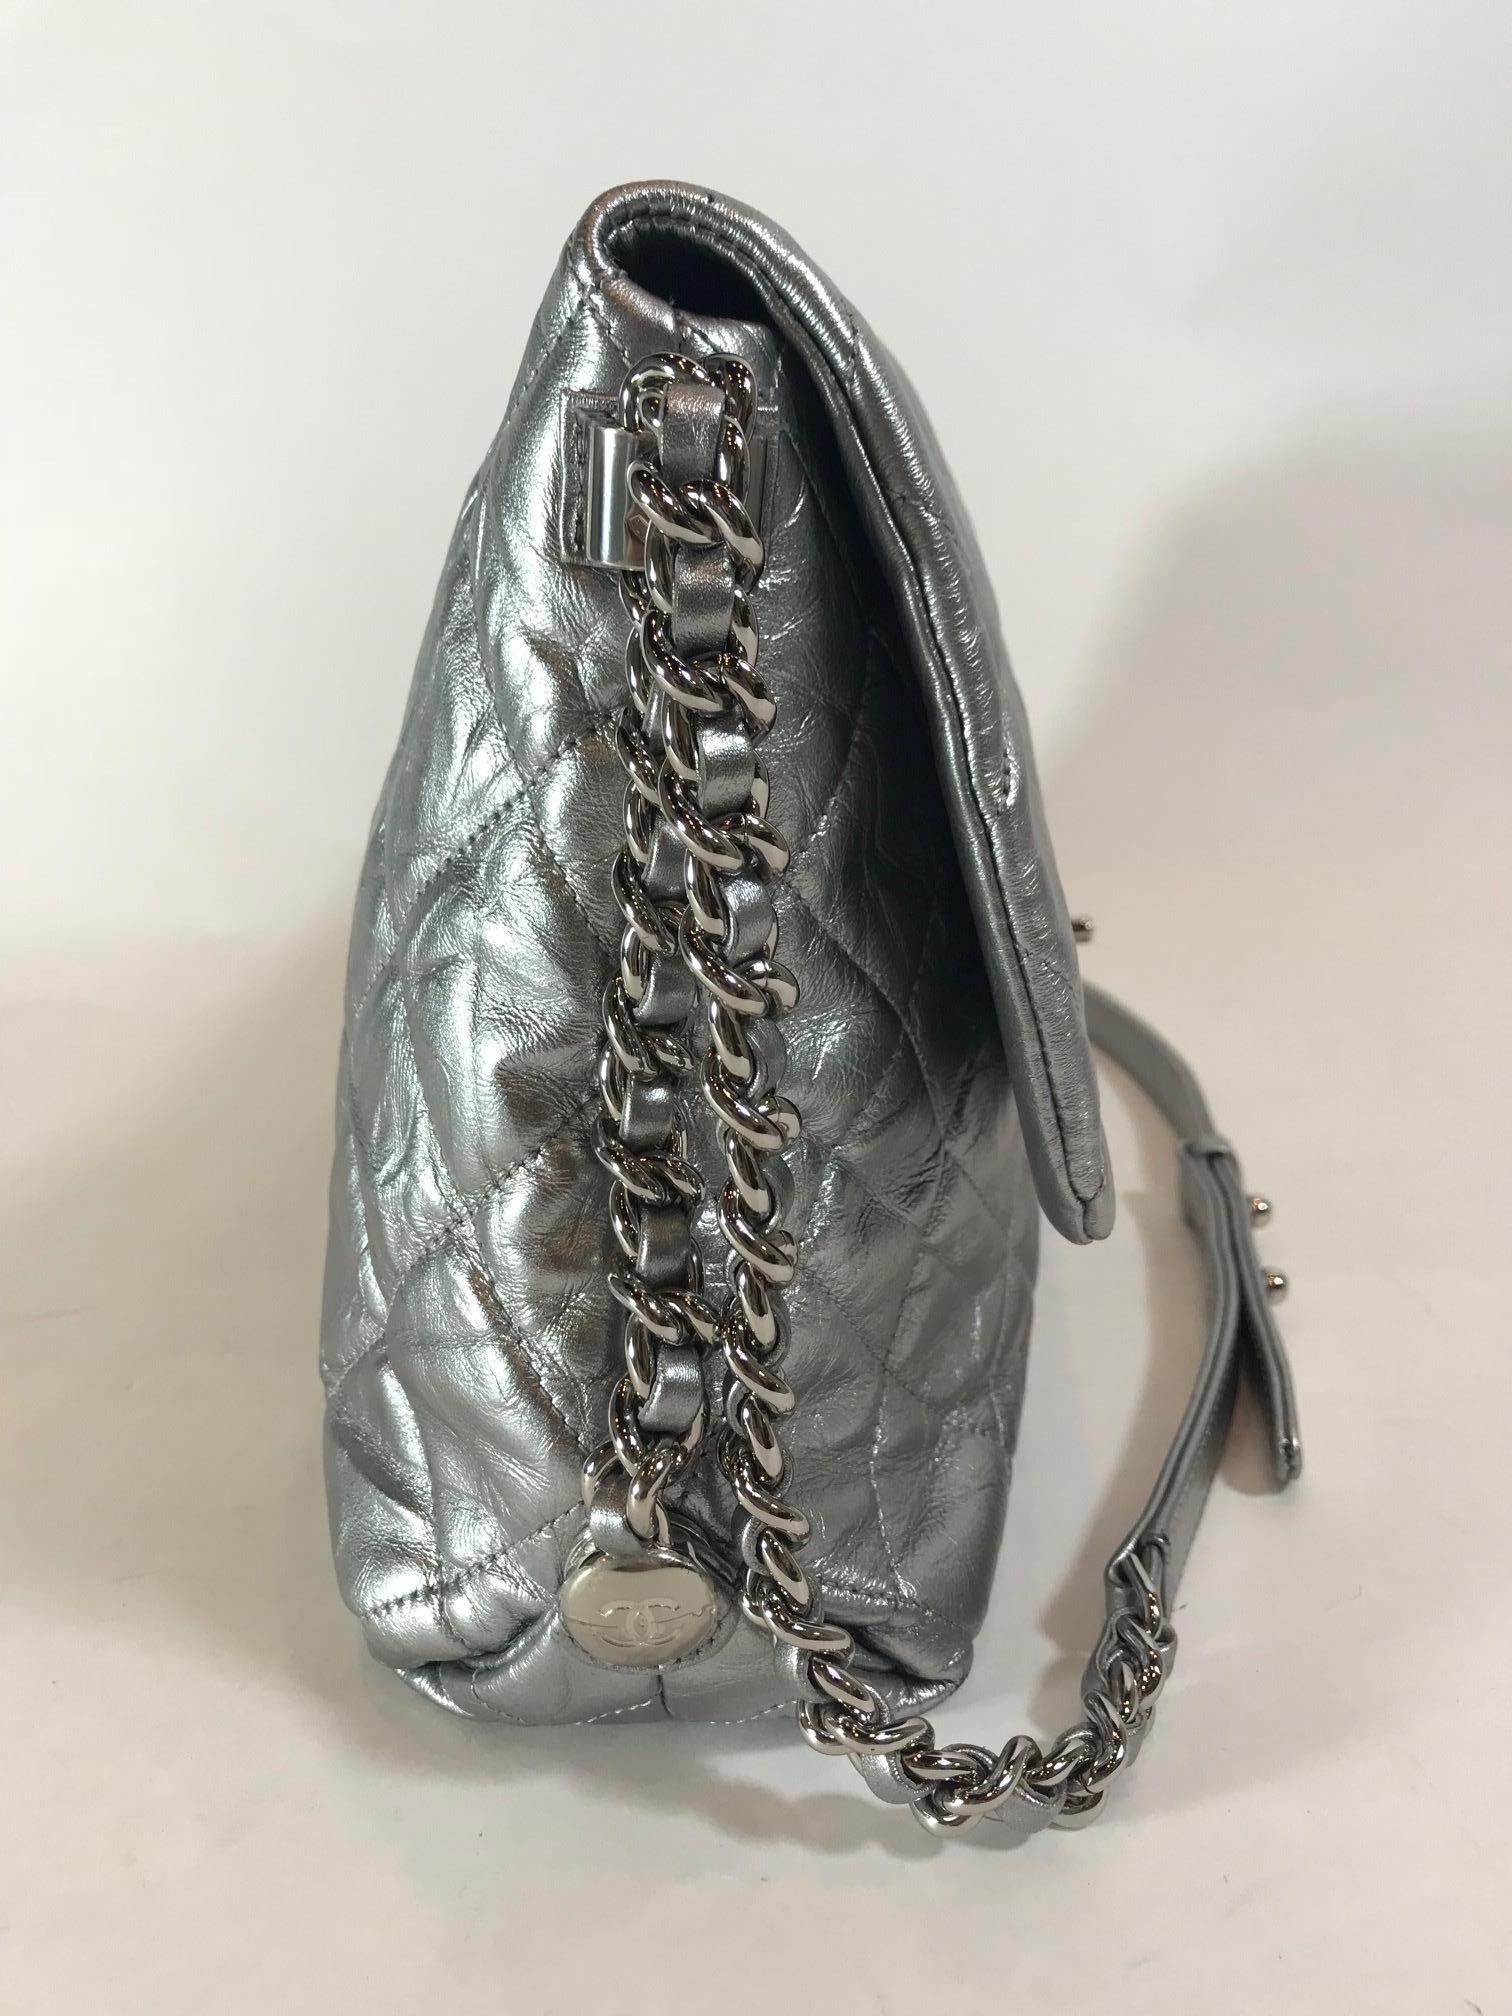 Silver metallic quilted calfskin leather. Silver-tone hardware. Front flap closure with 